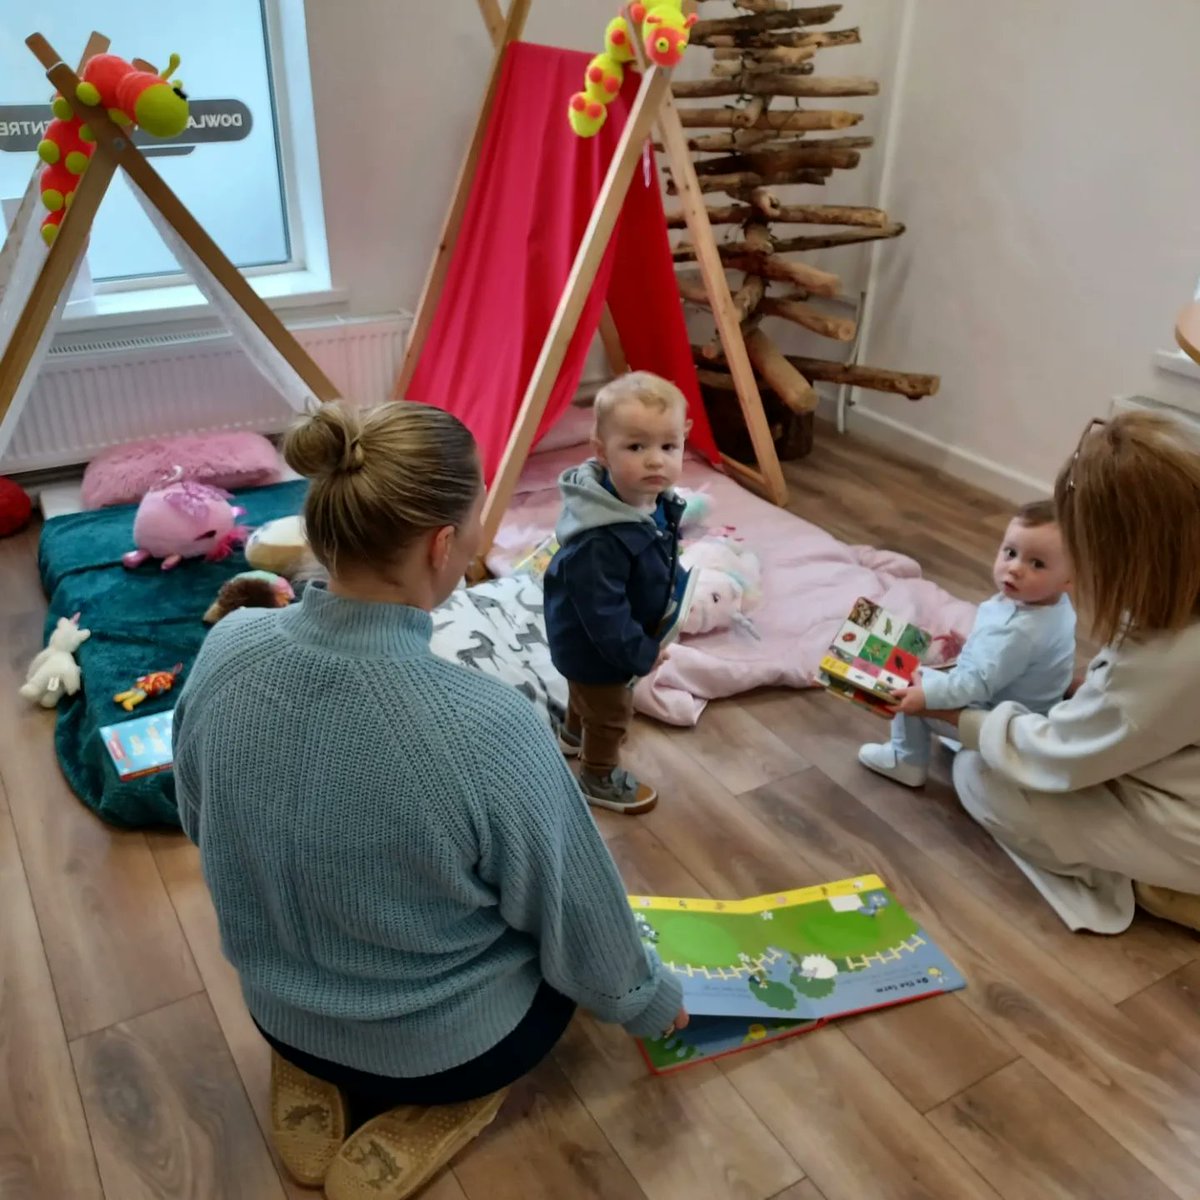 Baby Bookworms had a lovely session yesterday... all enjoying books, play, socialising and fun.

Pop along at 10am next Tuesday to join in the Baby Bookworm fun

#babybookworm #dowlaiscommunitycentre #merthyrtydfil #parentandtoddler